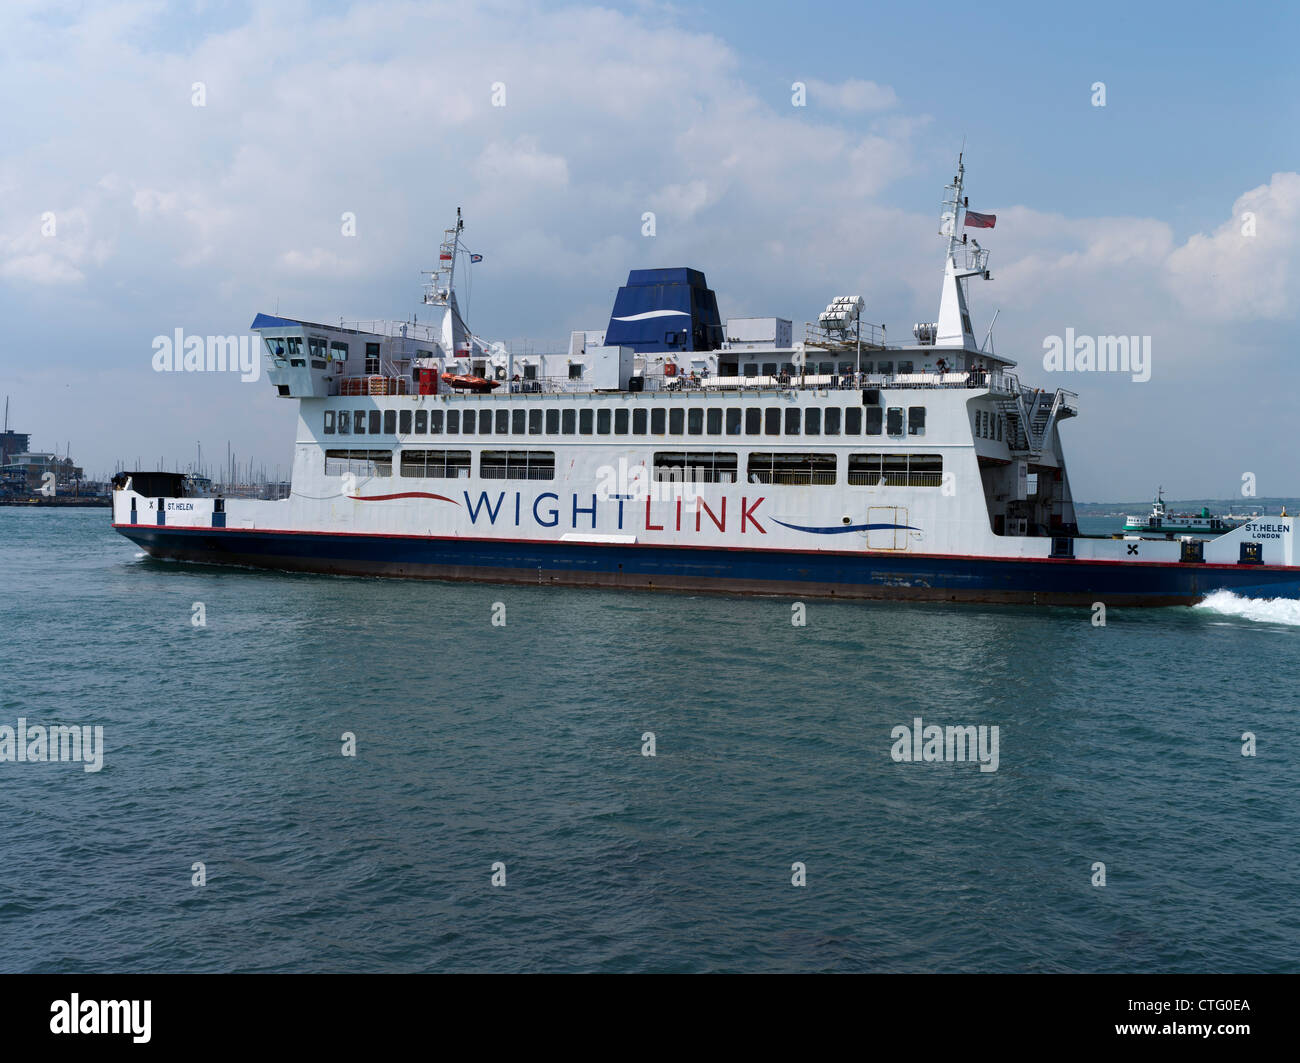 dh Old Portsmouth PORTSMOUTH HAMPSHIRE Wightlink ferry boat St Helen leaving Portsmouth harbour Stock Photo